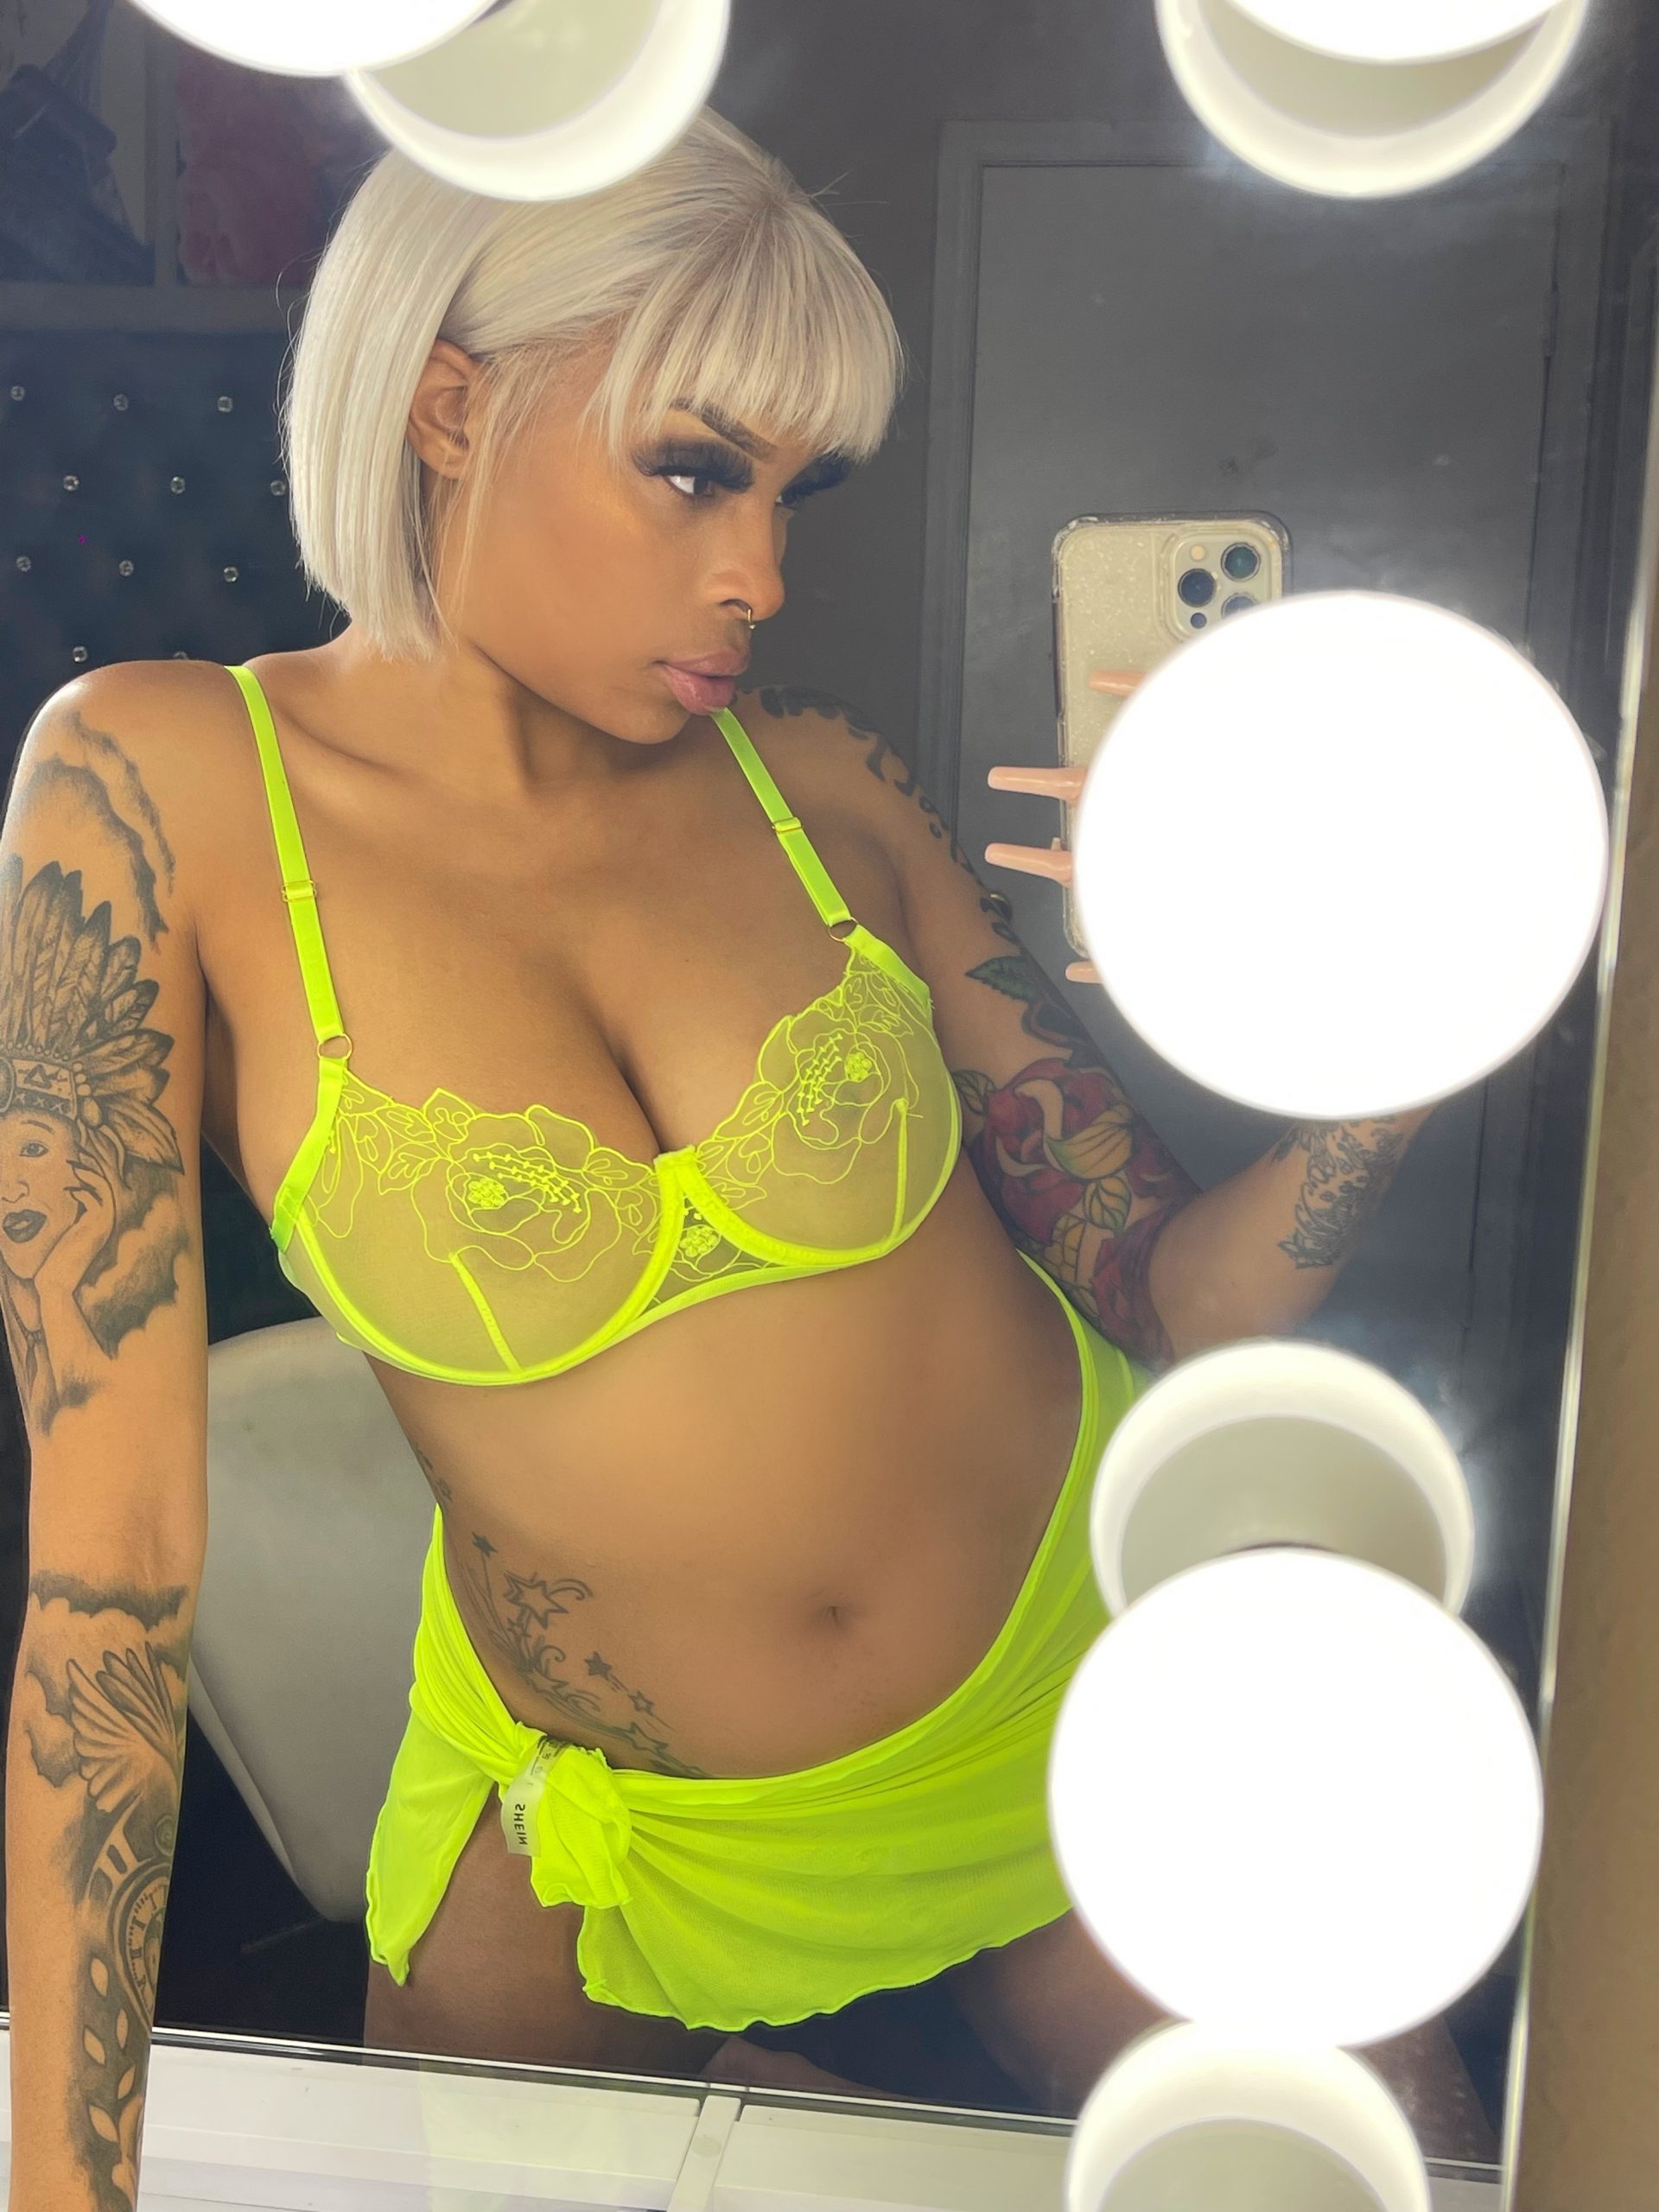 You are currently viewing official_deafbae Onlyfans Model from